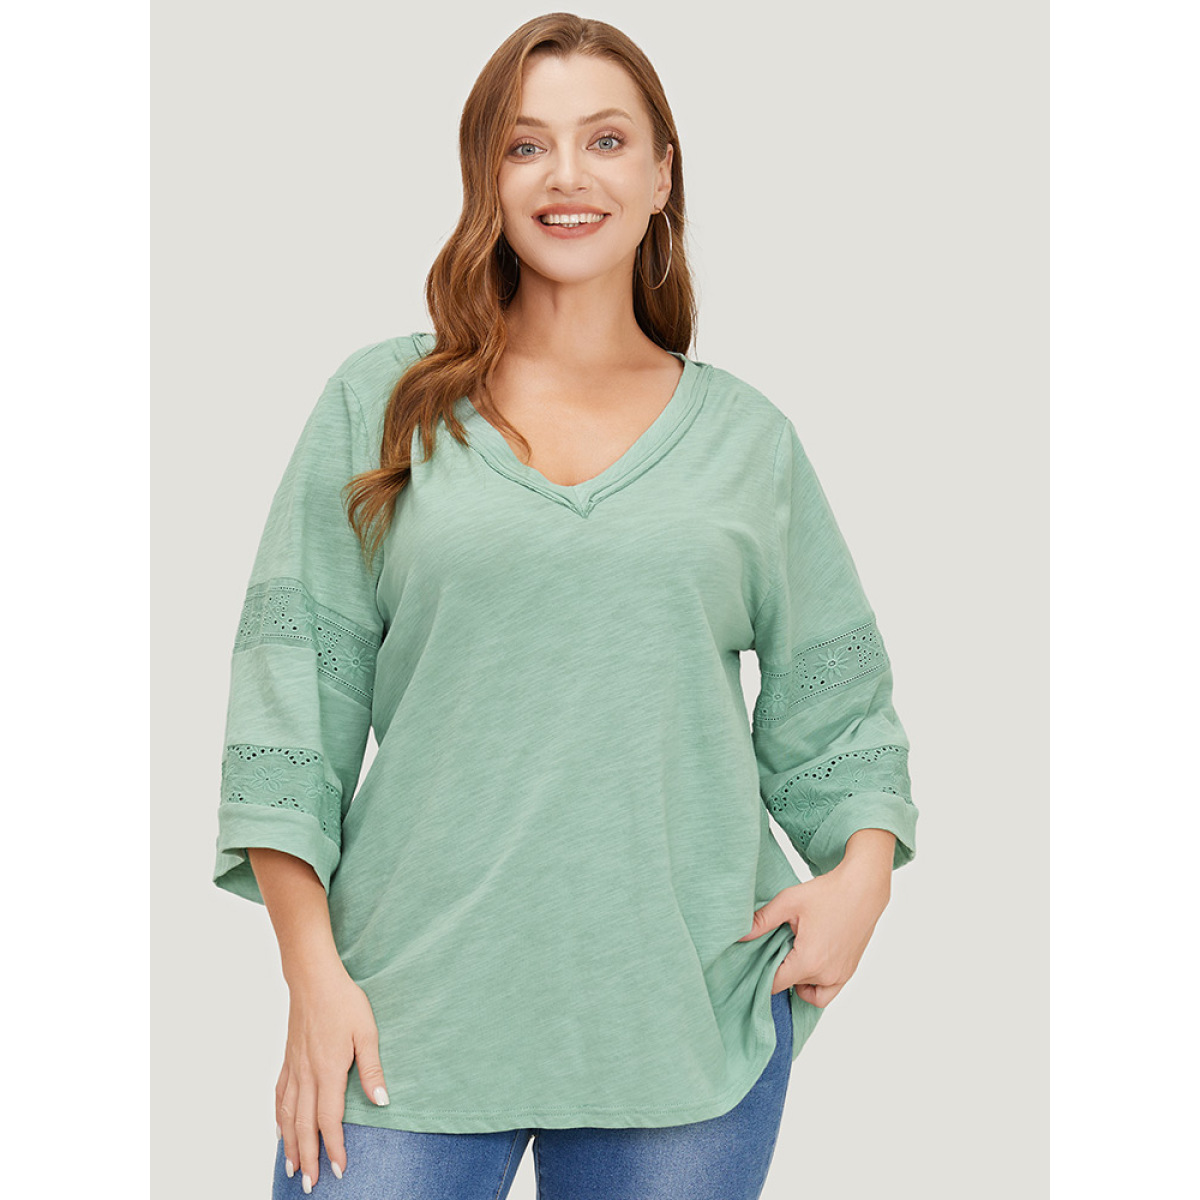 

Plus Size Solid Broderie Anglaise Flounce Sleeve T-shirt Mint Women Elegant Broderie anglaise Plain V-neck Dailywear T-shirts BloomChic